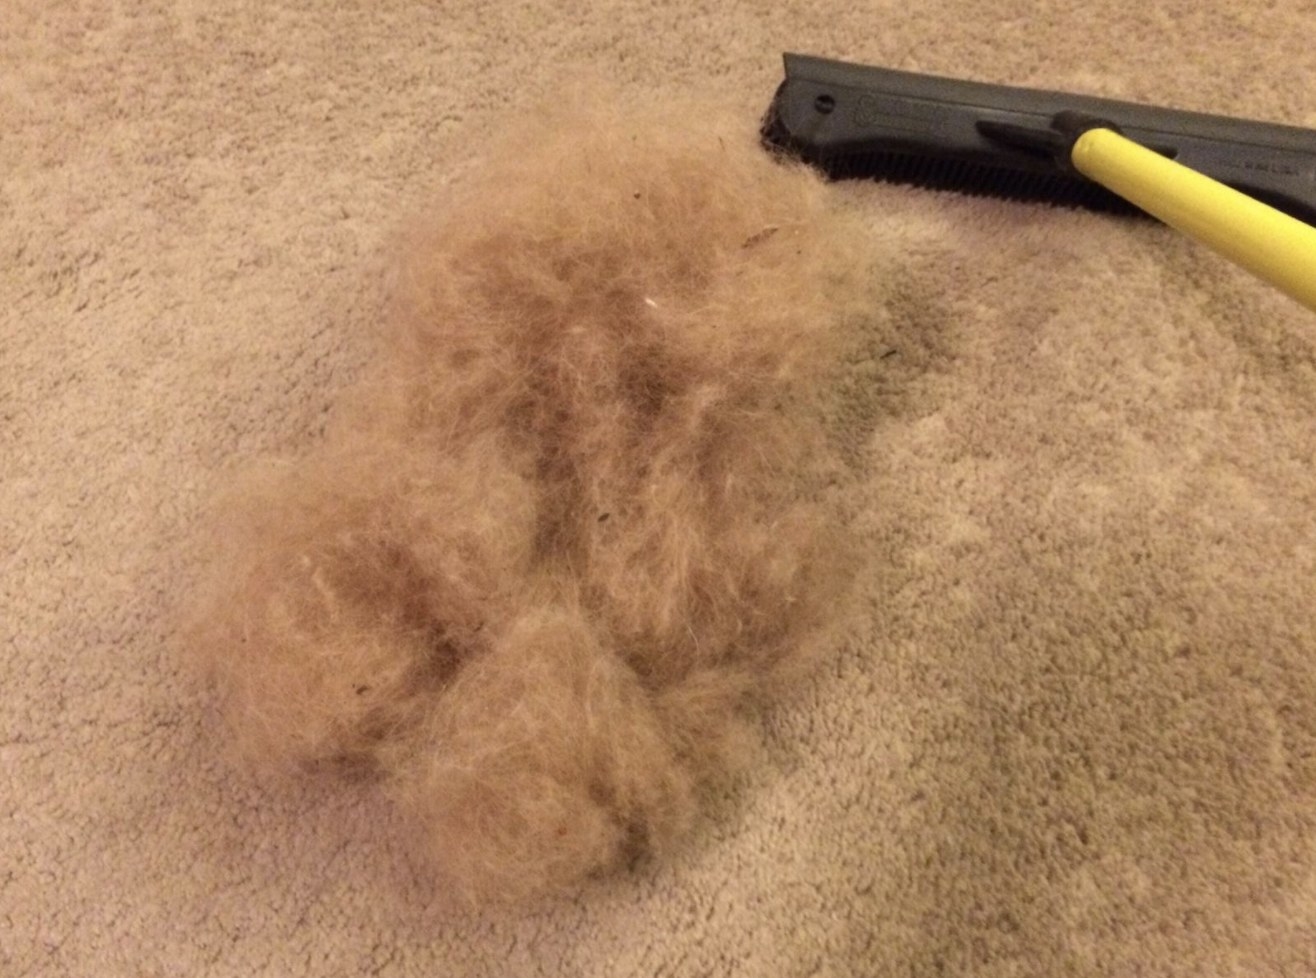 fur collected from a rug next to the broom